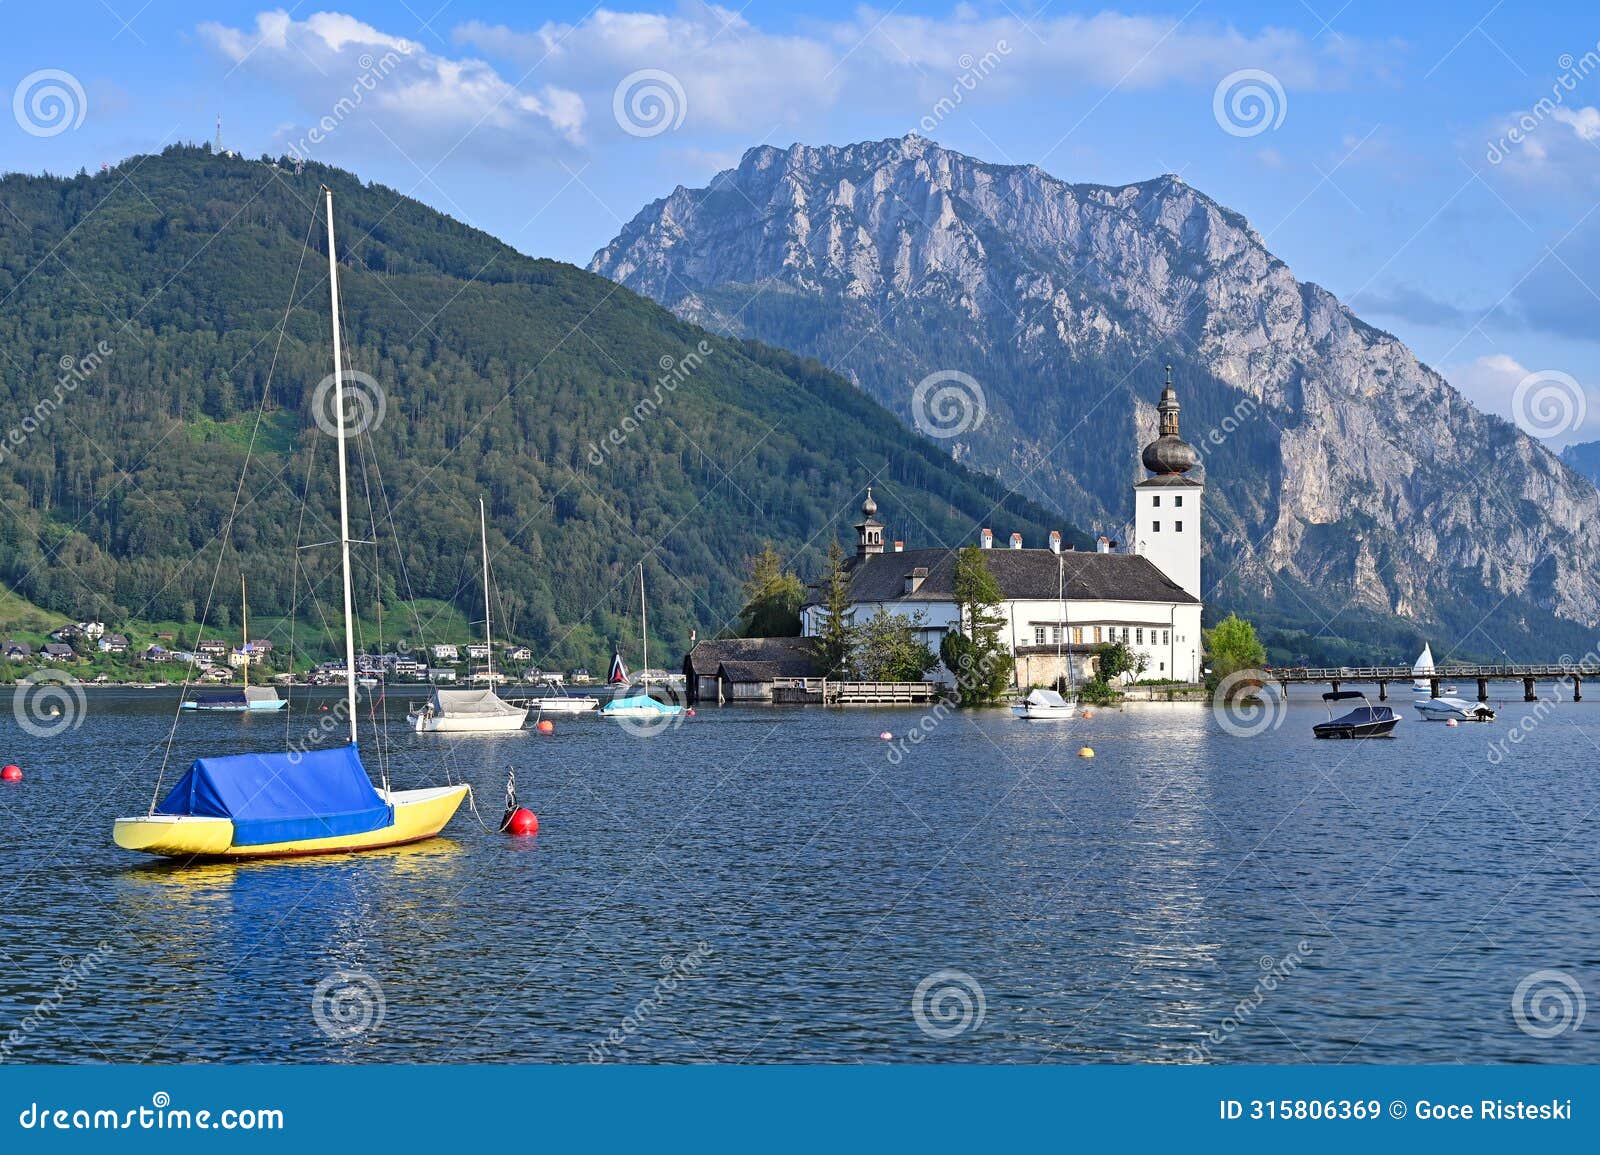 castle schloss ort orth on lake traunsee in gmunden landascape